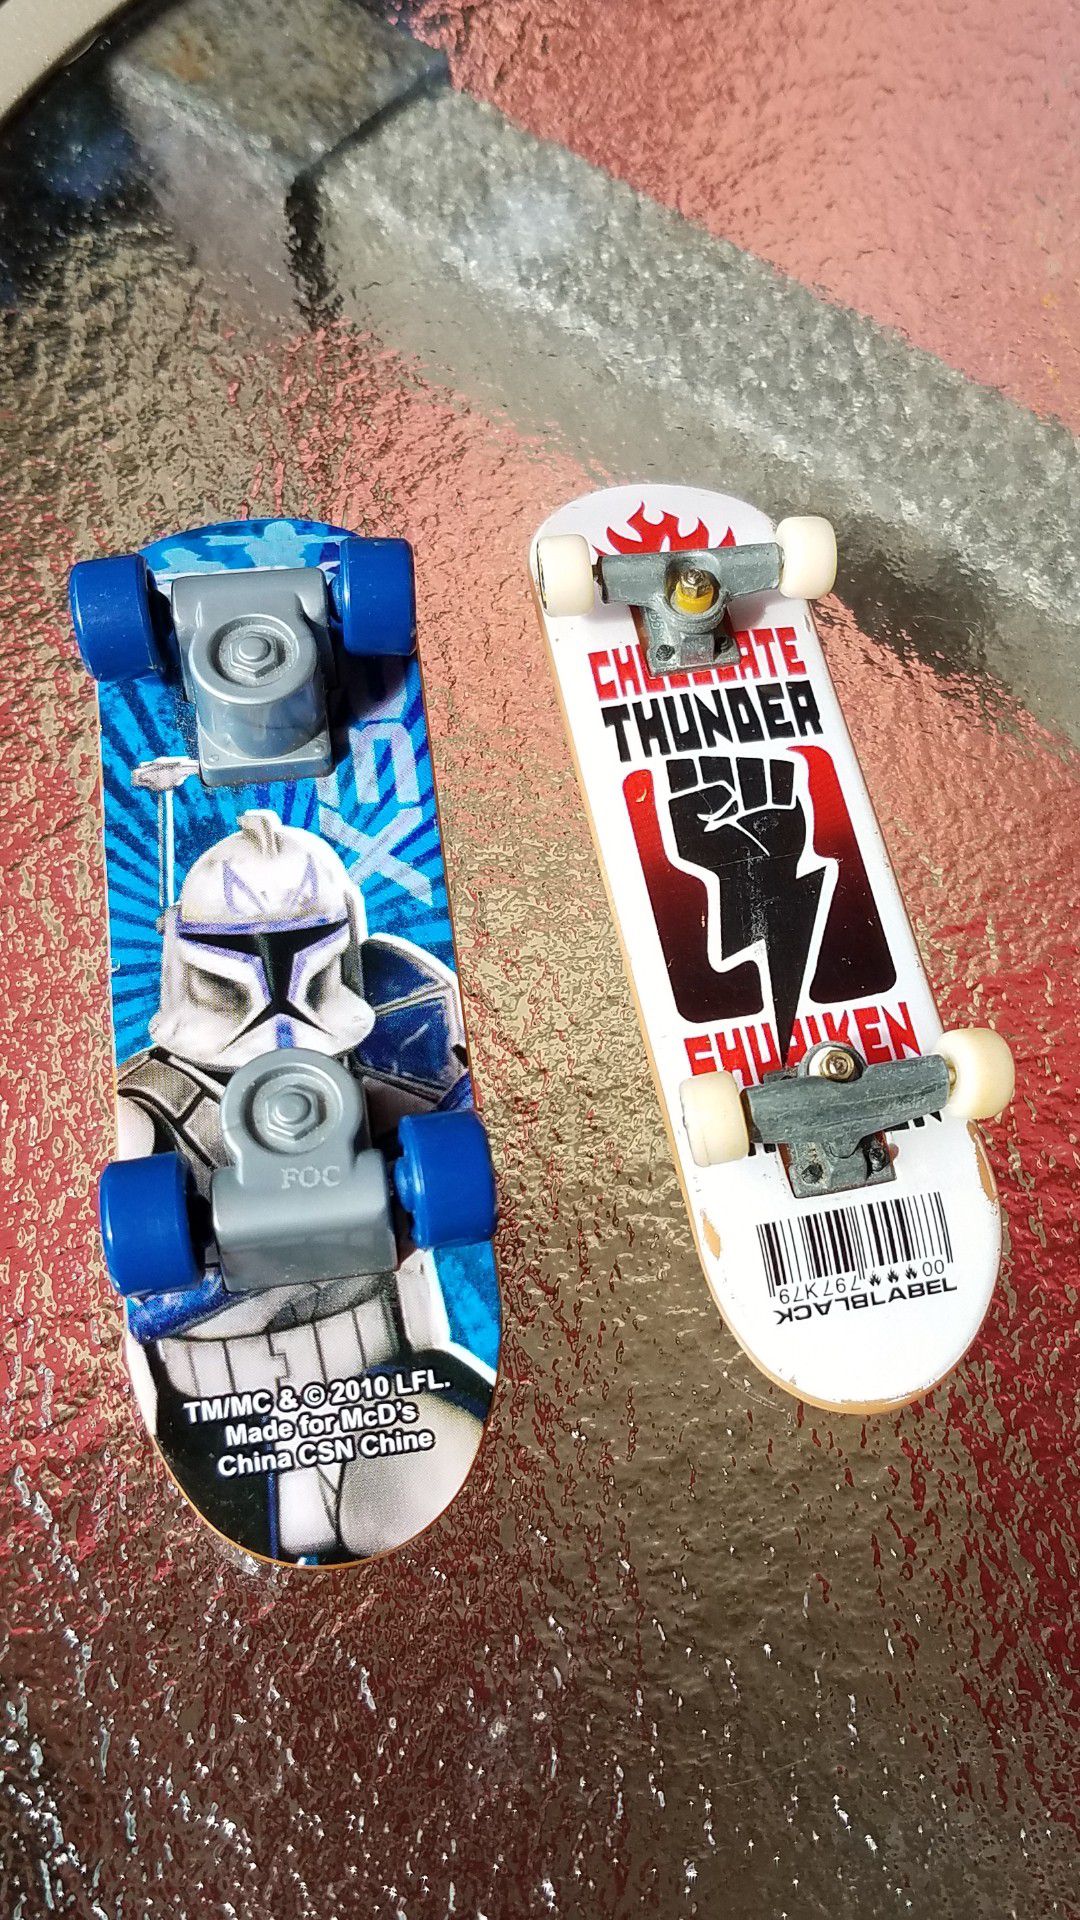 Fingerboard the Clone Wars and chocolateThunder lot